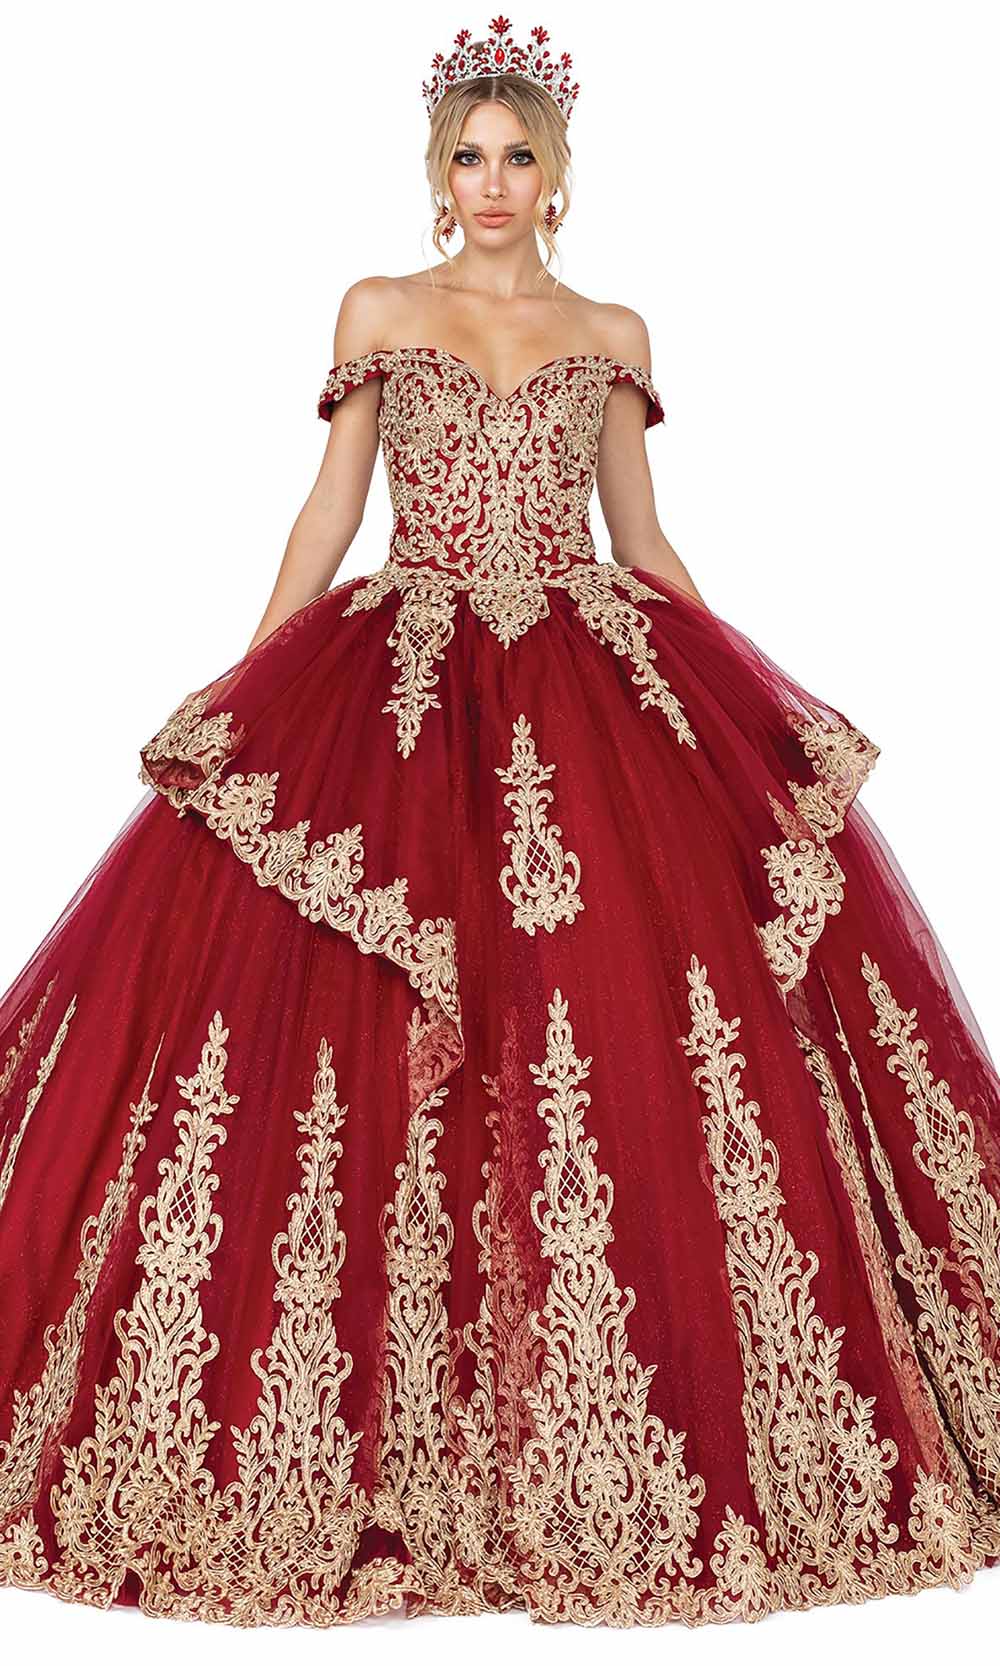 Dancing Queen - 1571 Gilt Lace Trimmed Ballgown In Burgundy